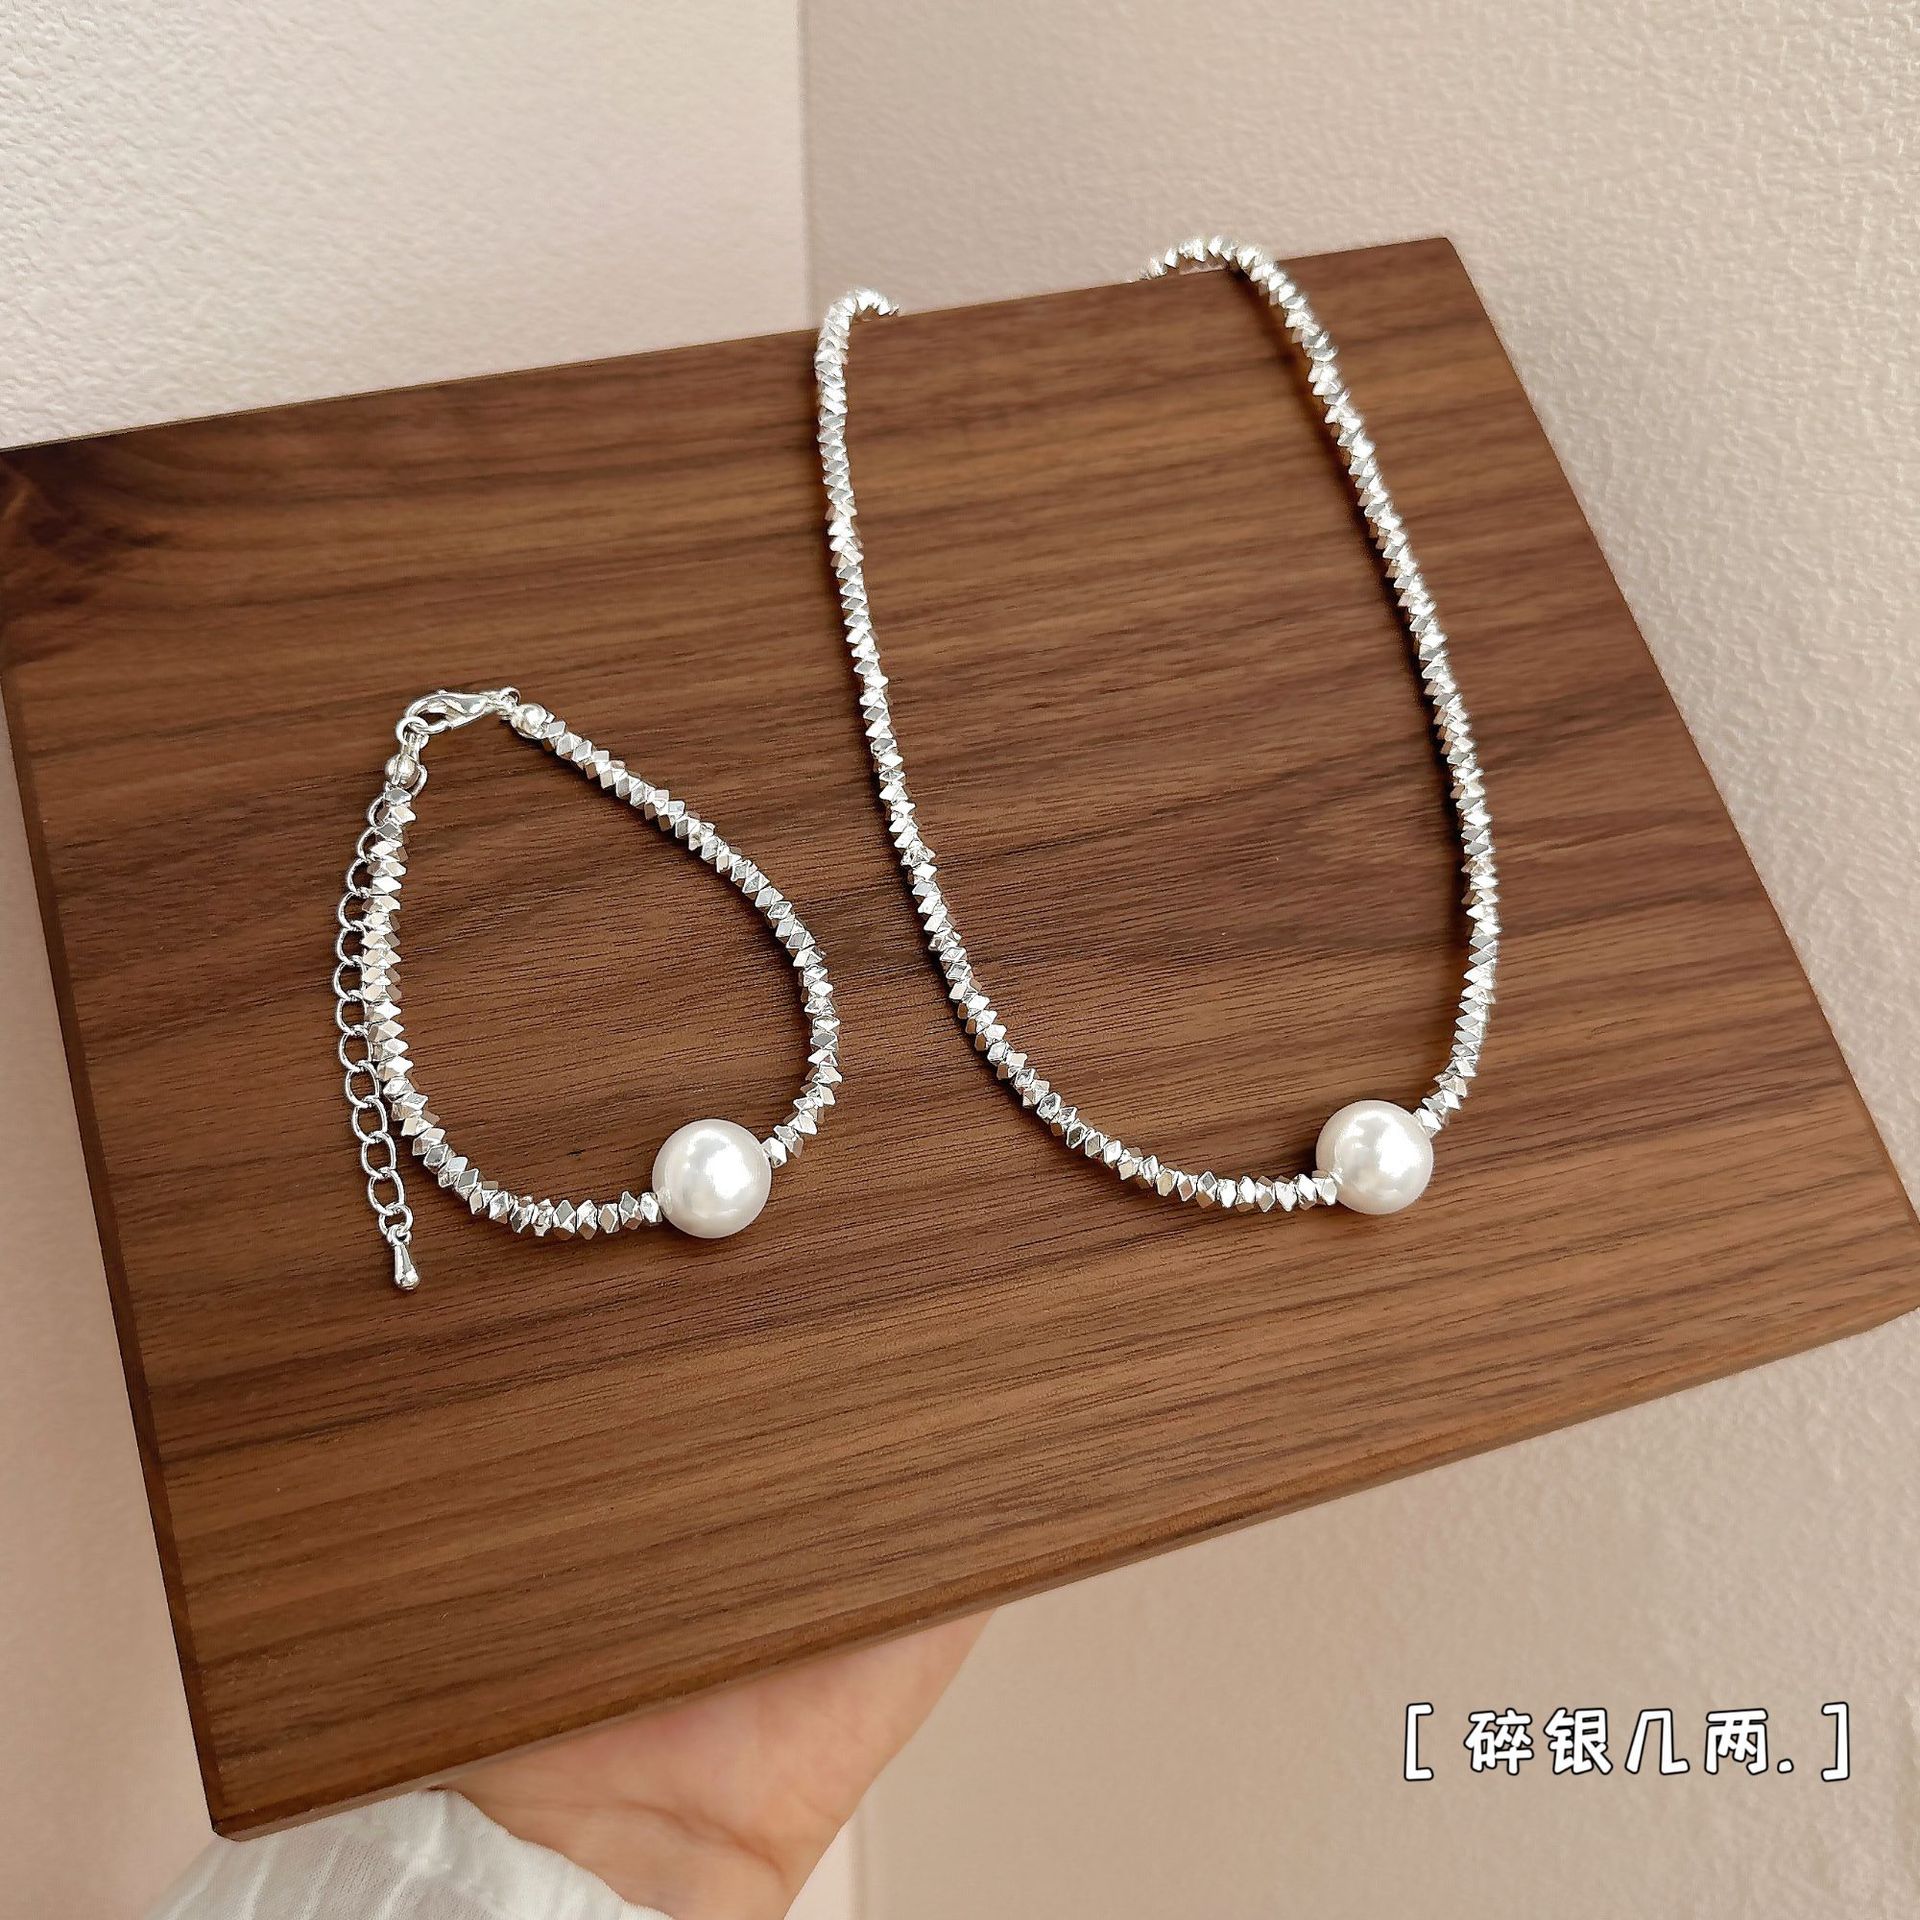 New Simple Small Pieces of Silver Pearl Fashion Necklace Bracelet Women's Daily Light Luxury Minority Exquisite Summer All-Matching